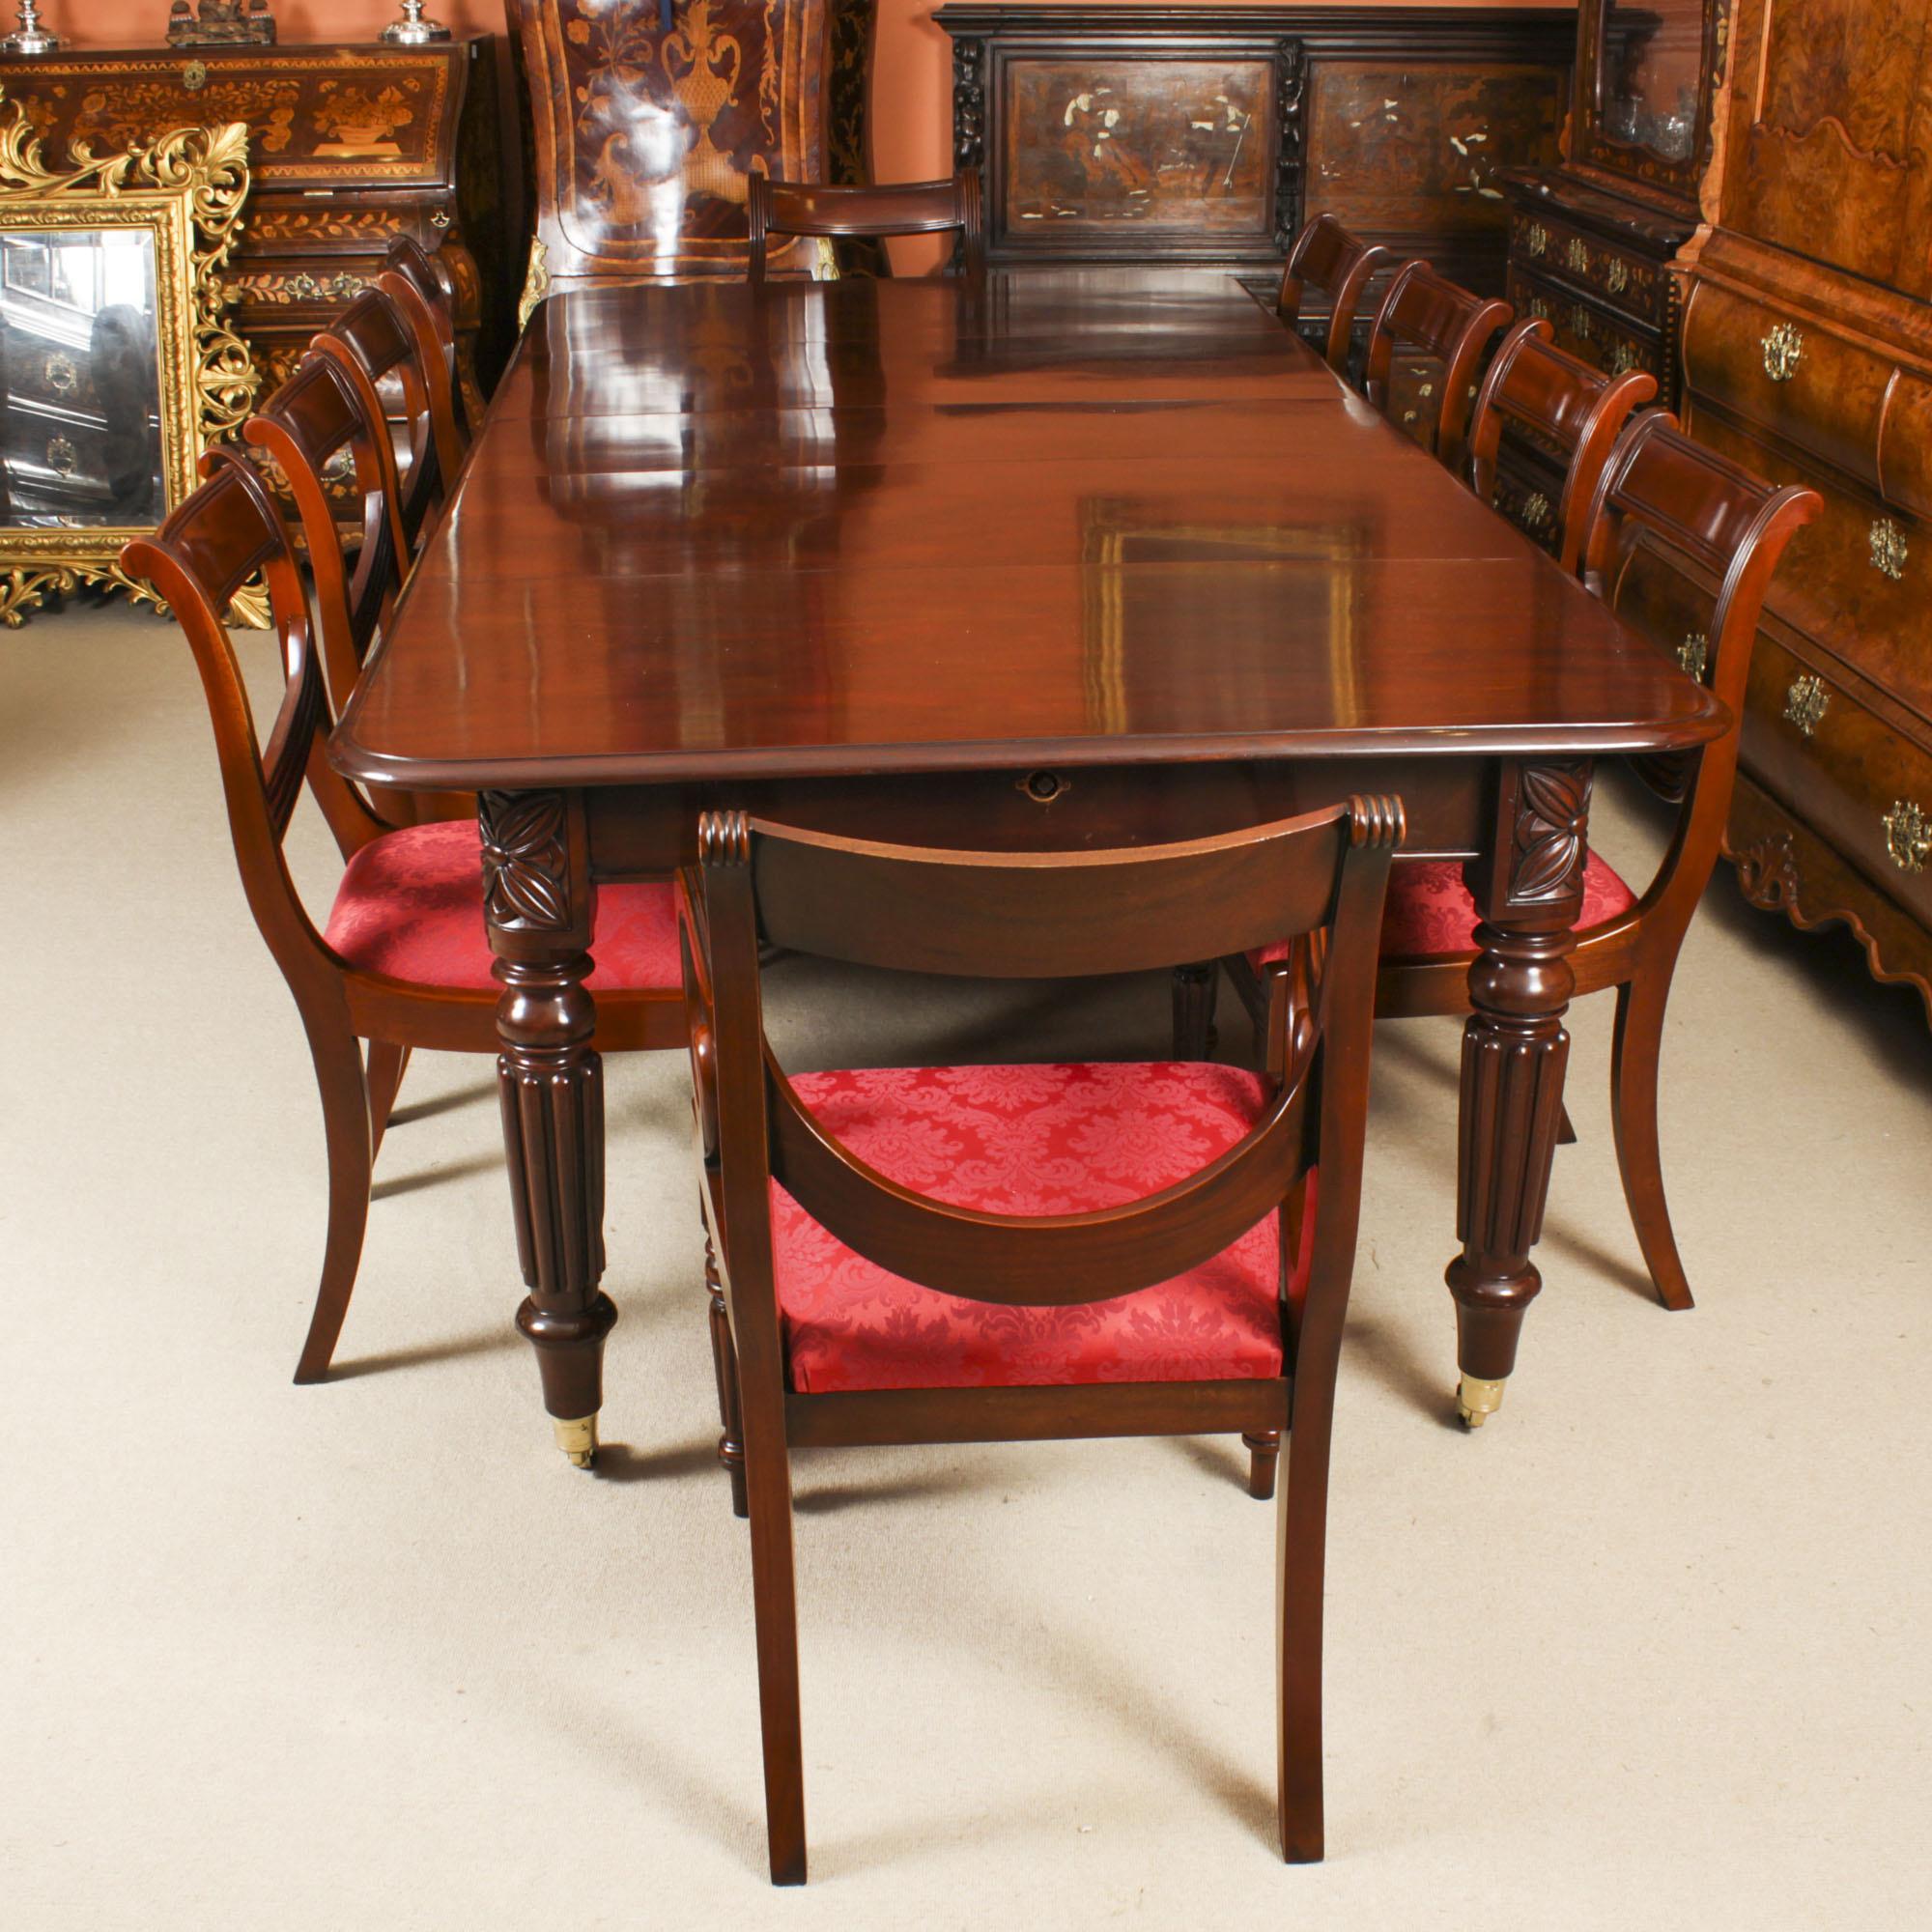 A very rare opportunity to own a fabulous dining set comprising an antique Regency dining table in the manner of Gillows, Circa 1820 in date, and a set of ten Vintage Regency Revival dining chairs.

The table is made of beautiful solid flame